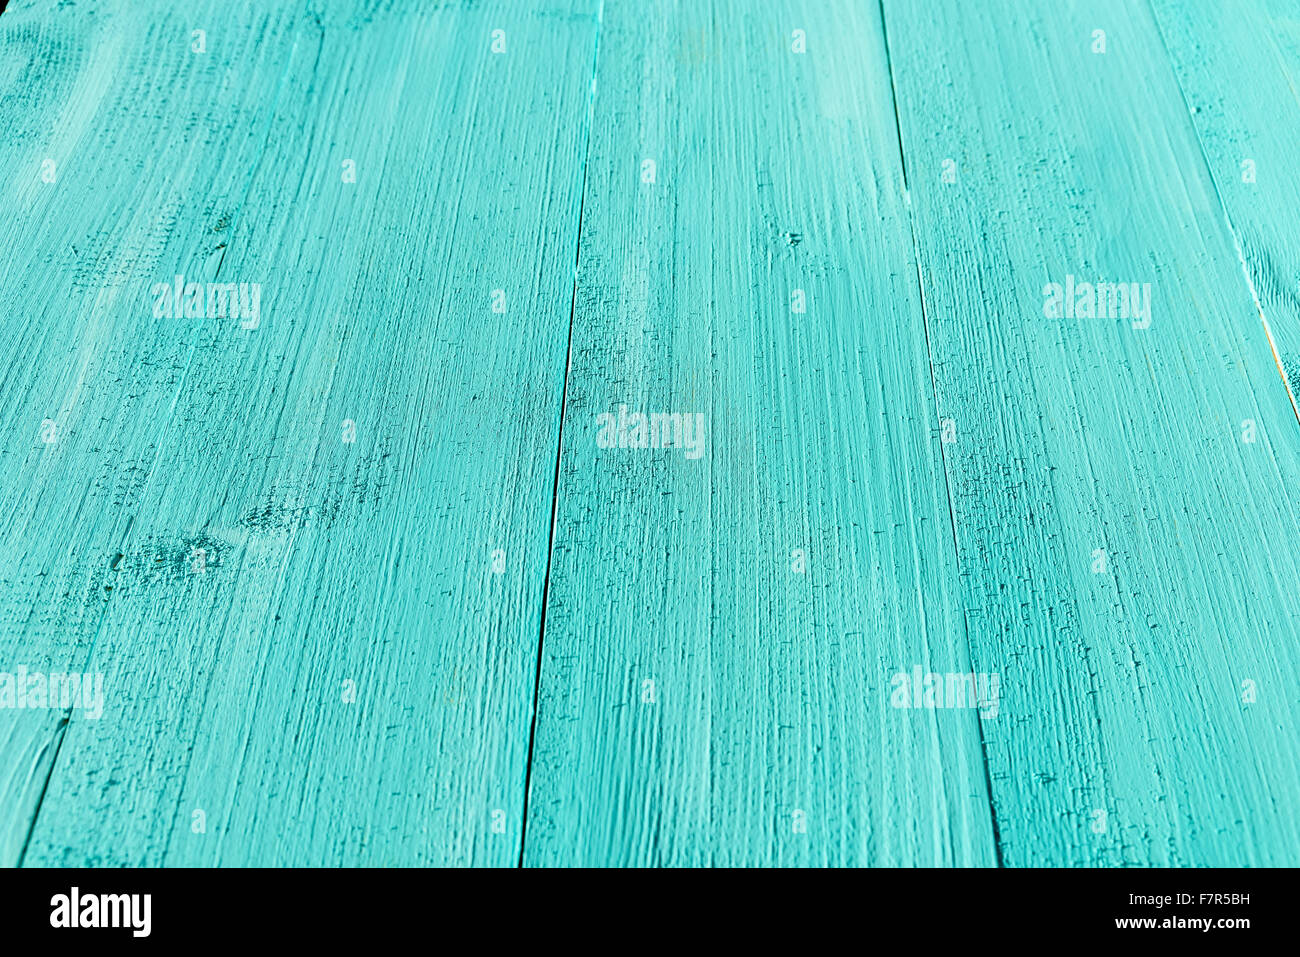 Vintage Blue Turquoise Wood Board Painted Background Stock Photo